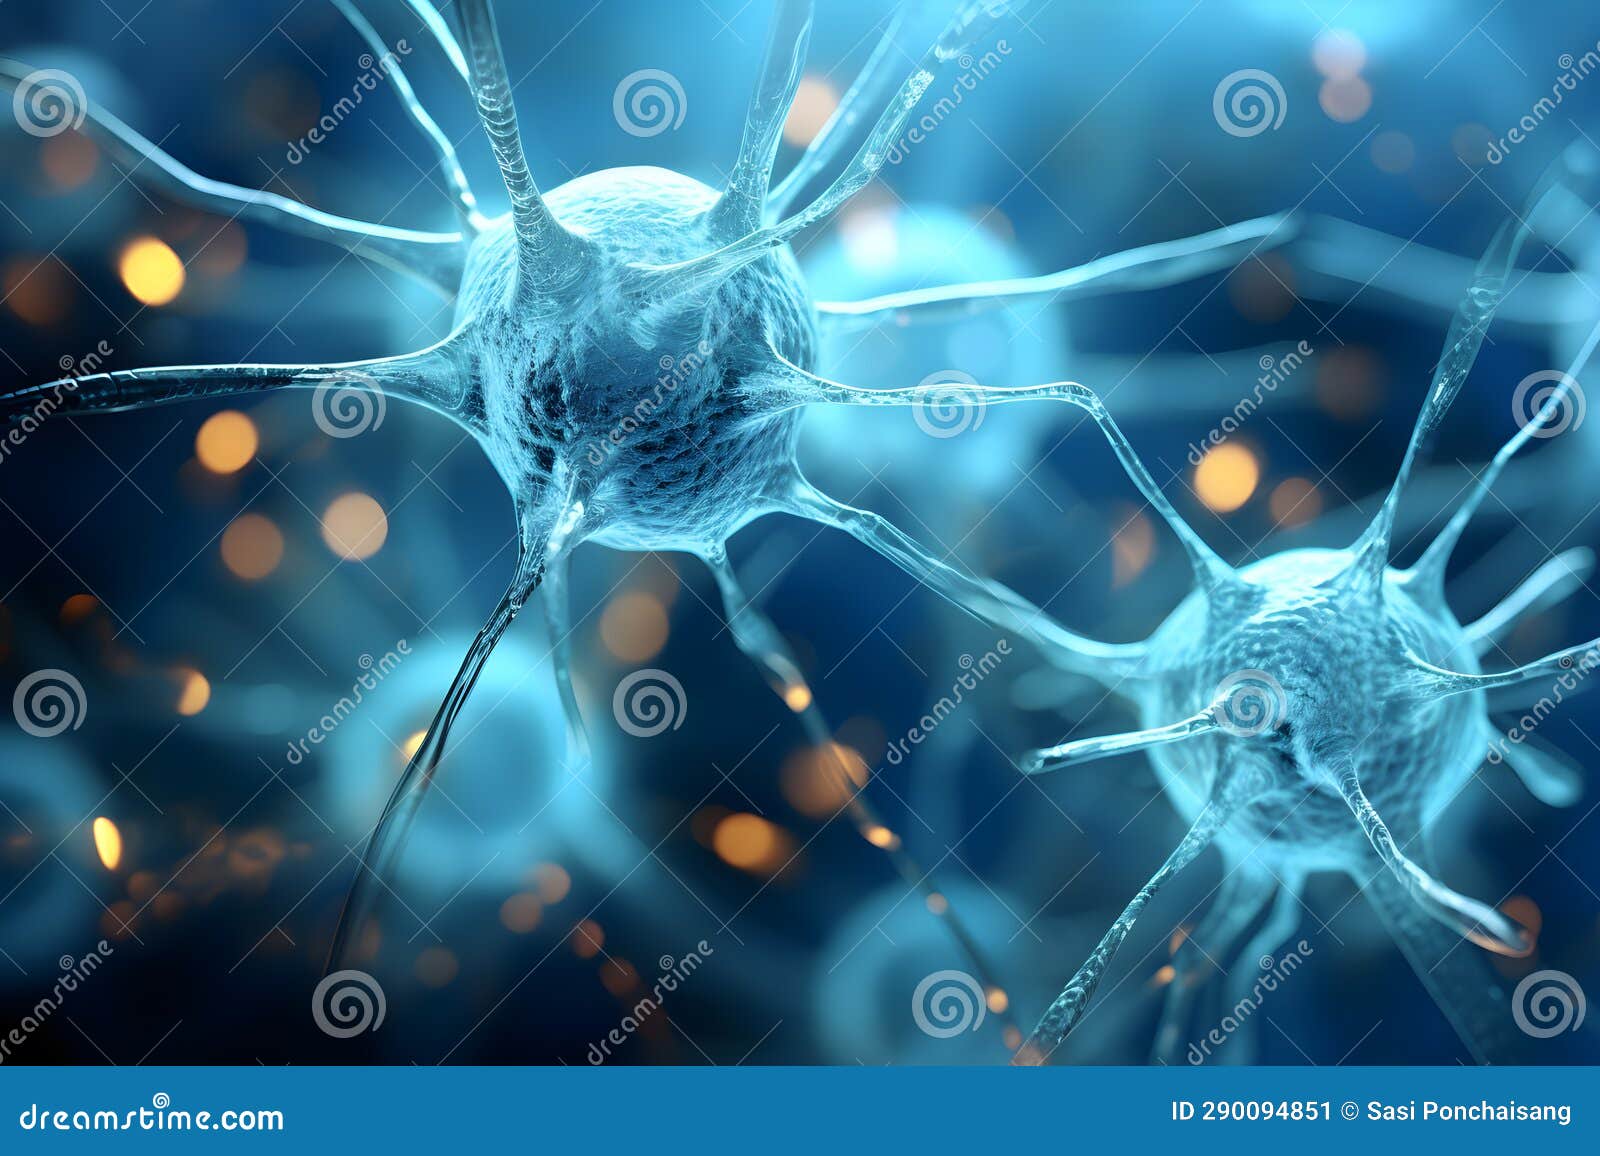 Microscopic of Neuron Brain Cell Network. Interconnected Nerve Cells ...